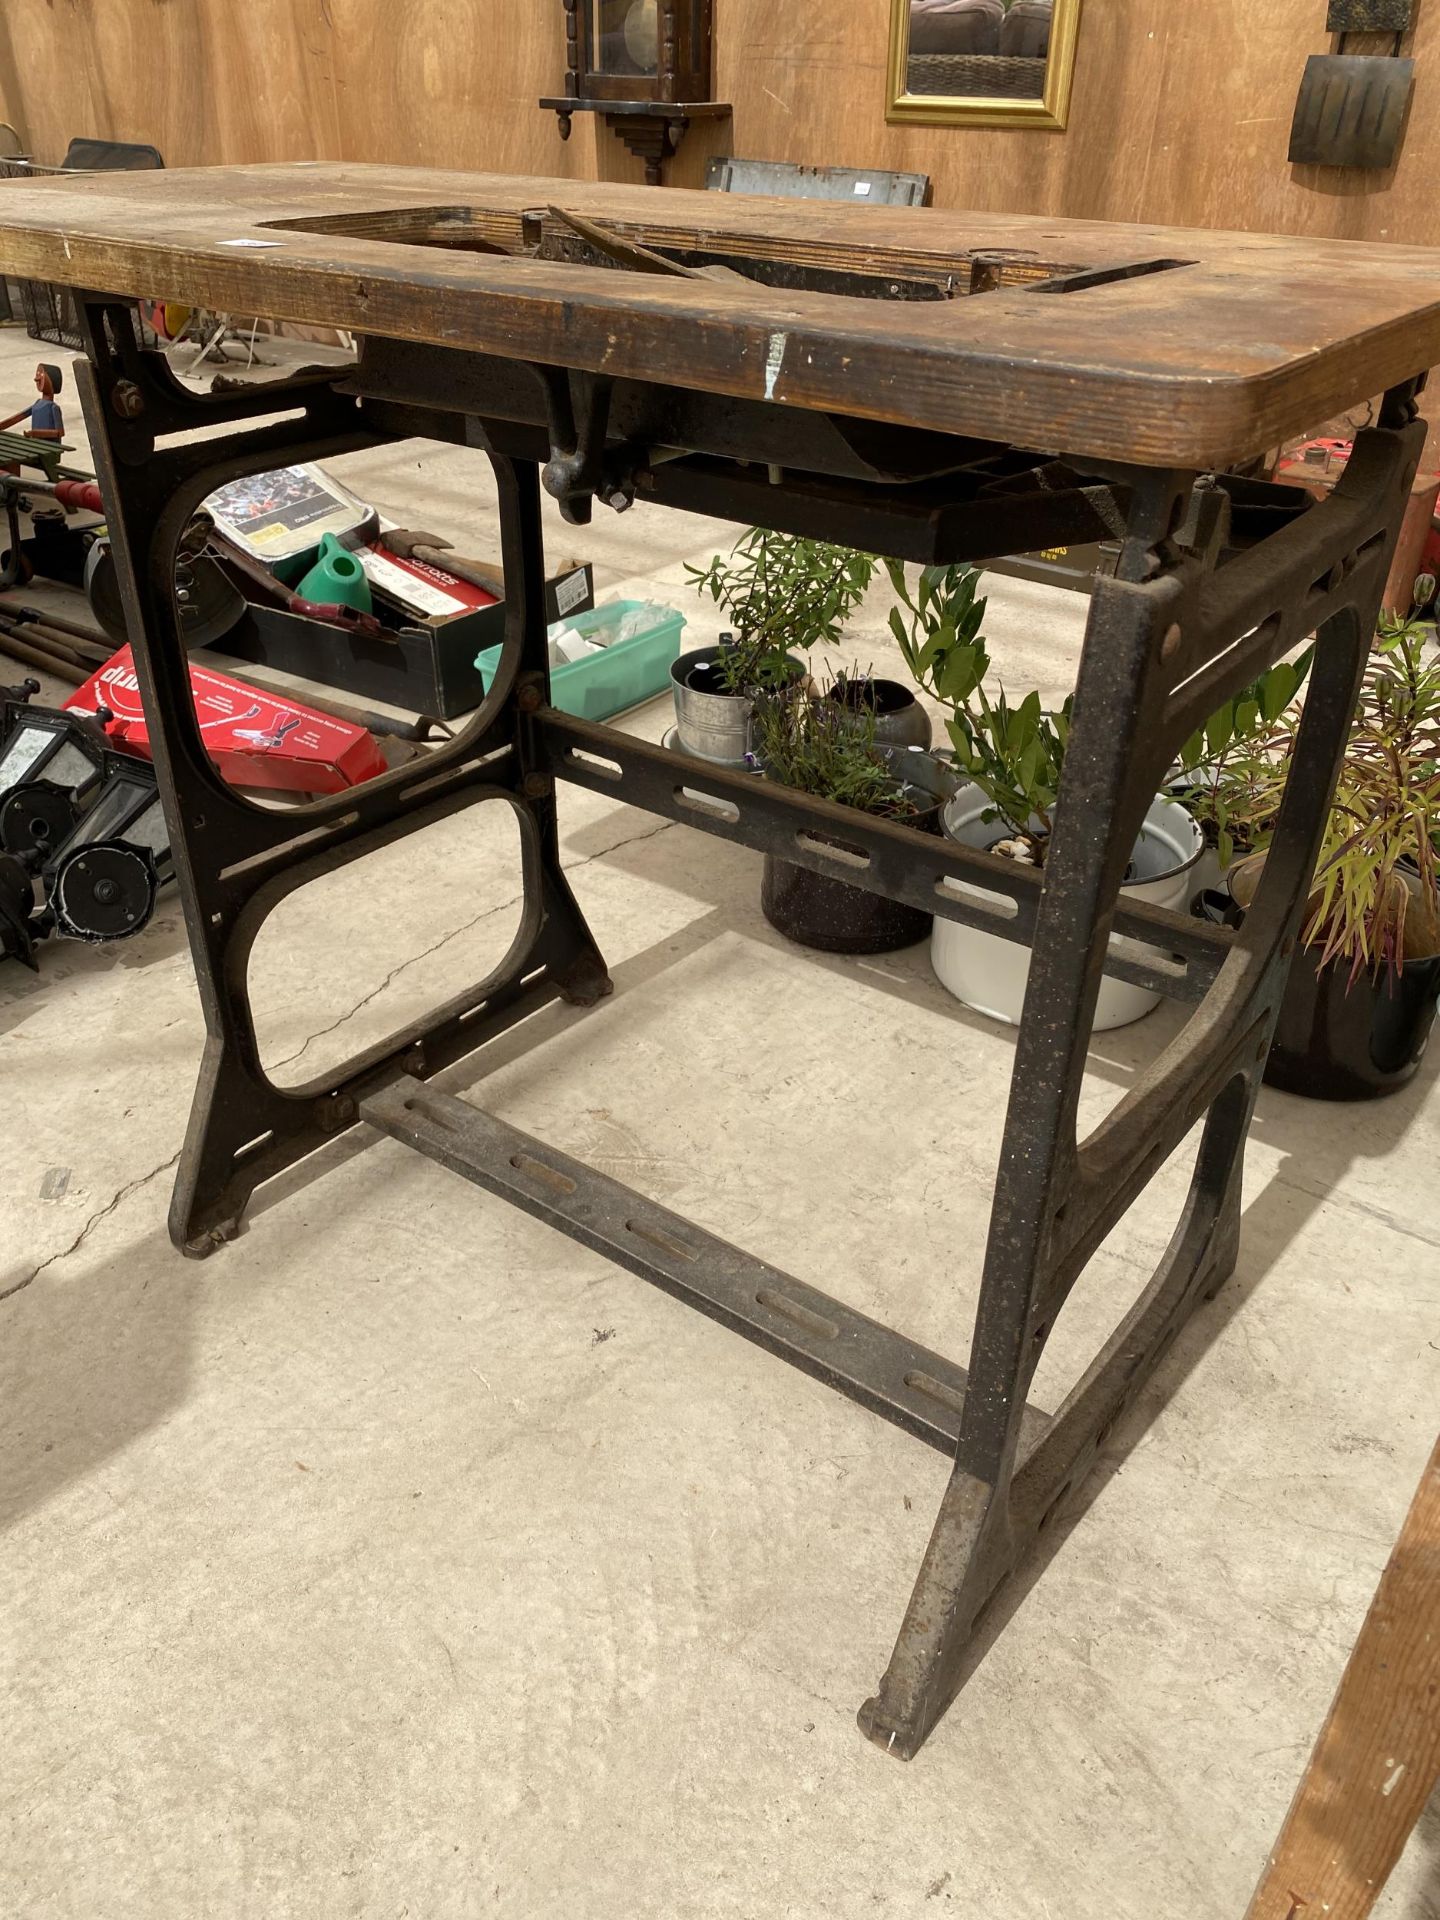 AN INDUSTRIAL SEWING MACHINE TABLE WITH HEAVY CAST IRON BASE - Image 3 of 4